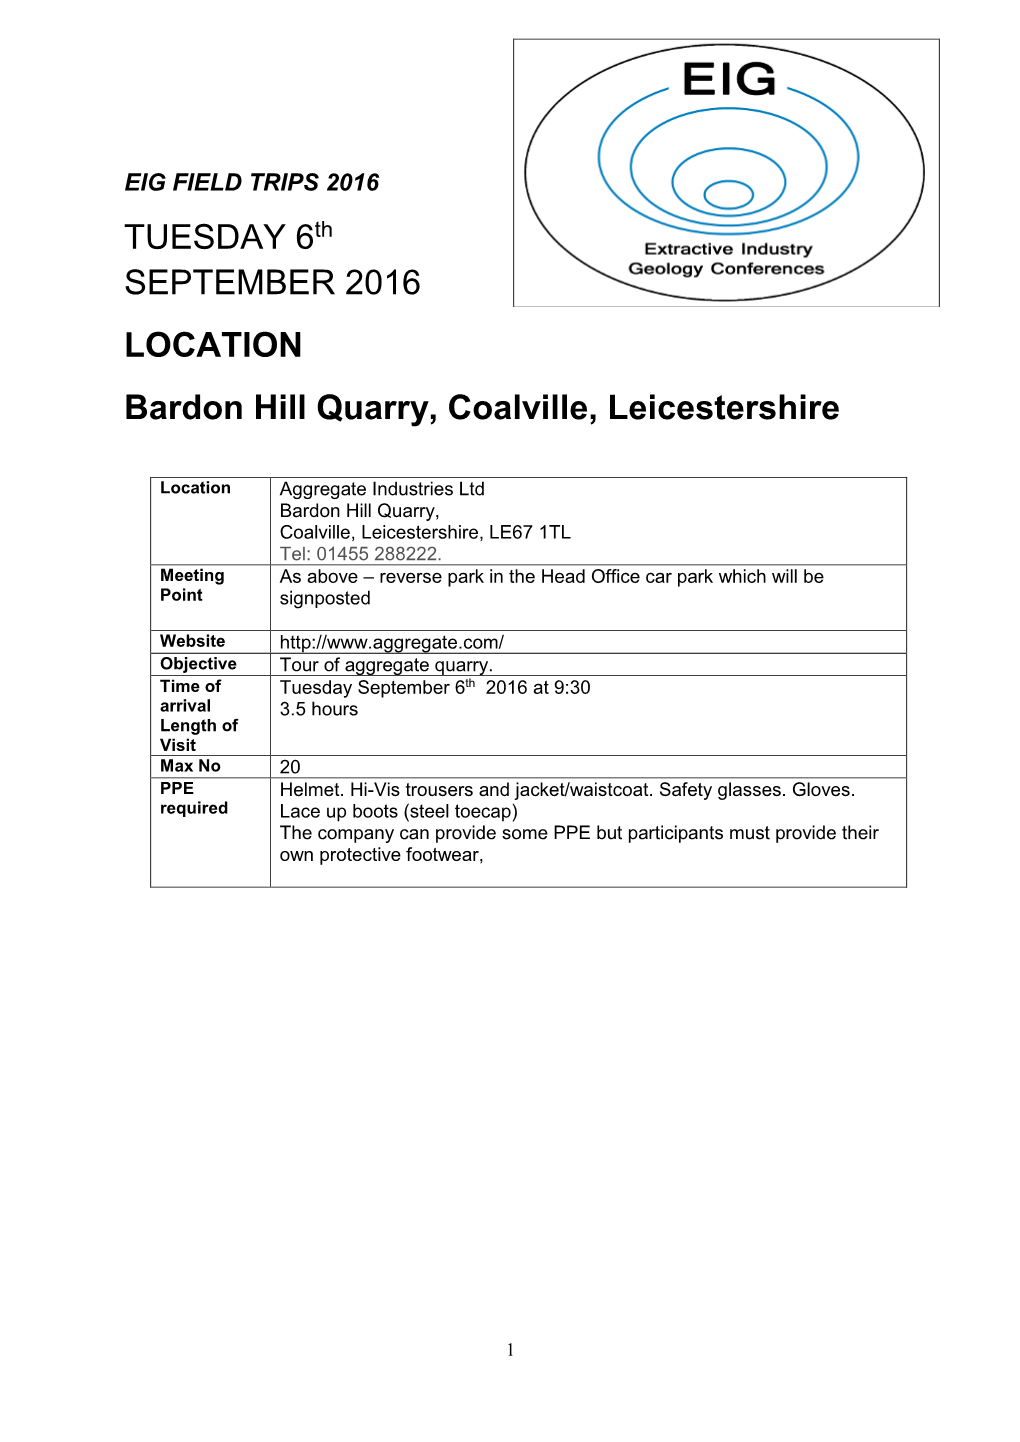 TUESDAY 6Th SEPTEMBER 2016 LOCATION Bardon Hill Quarry, Coalville, Leicestershire